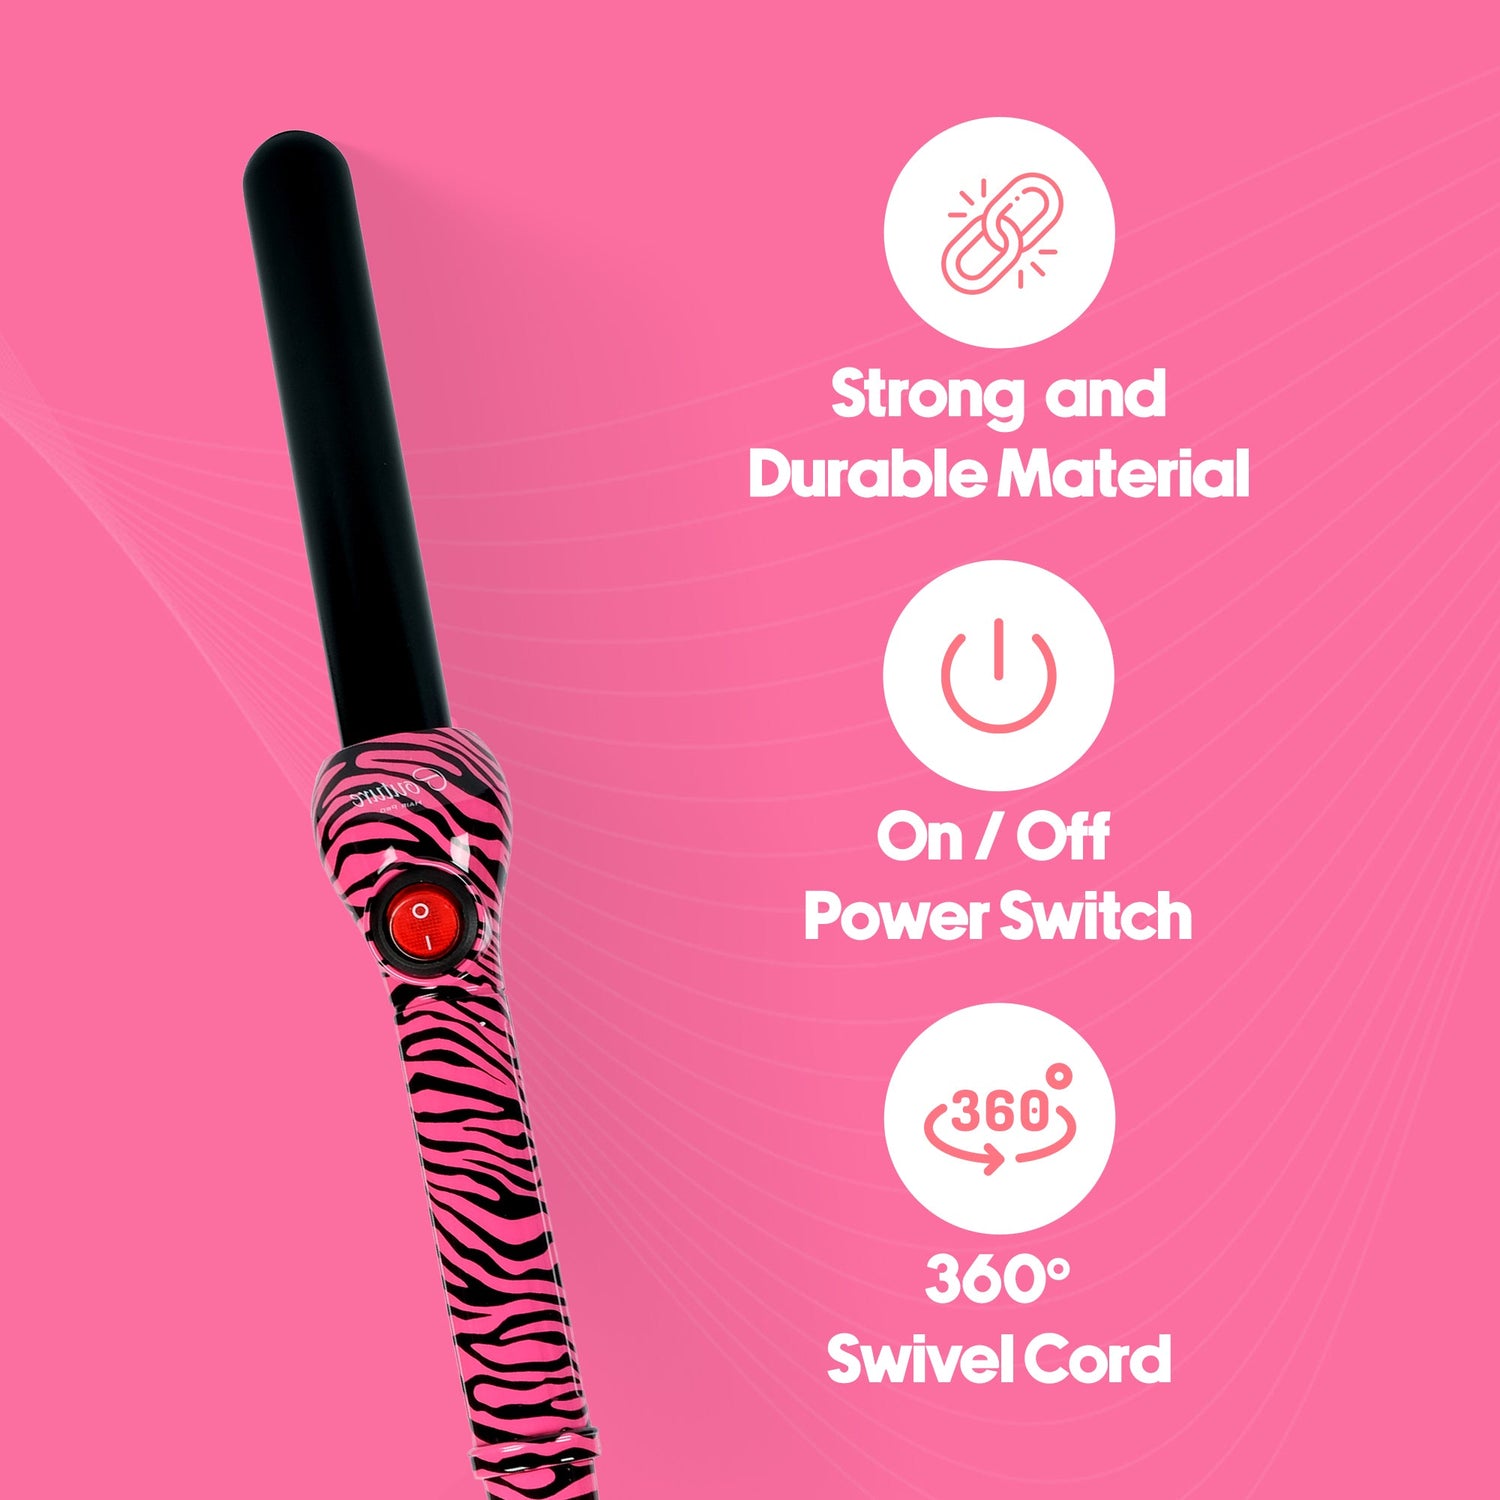 Couture Hair Pro Hair Curler 25 MM Beverly Hills Limited Edition - Pink Zebra - Couture Hair Pro